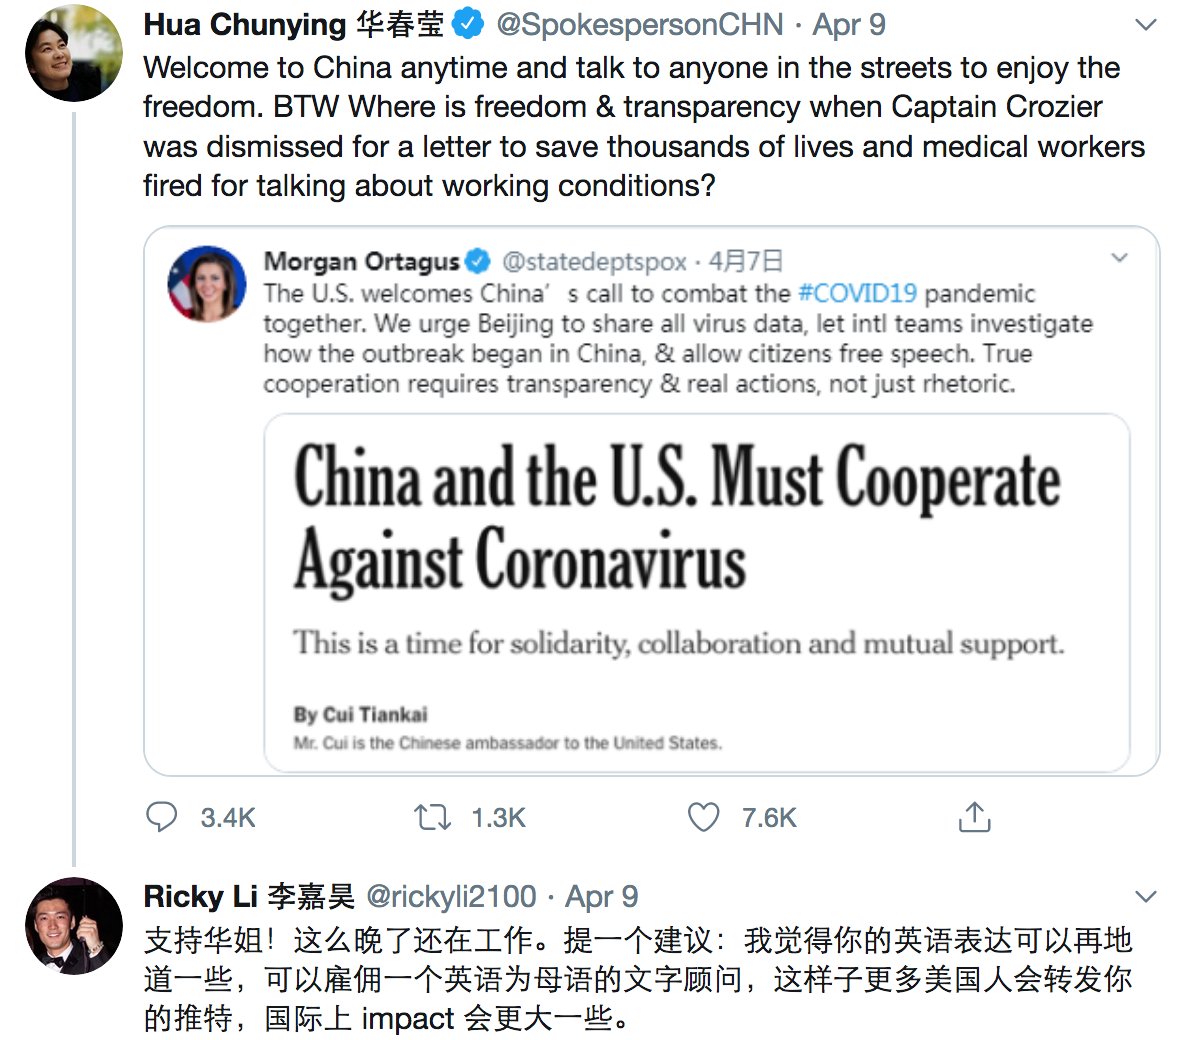 Ricky comes out of the woodwork just in time to answer some serious questions. Ricky – a Harvard grad, now working for  @Fidelity – has fawned over the Chinese Communist Party's spokeswoman, even giving recommendations of how to reach more Americans online...  https://twitter.com/rickyli2100/status/1262786554998796288